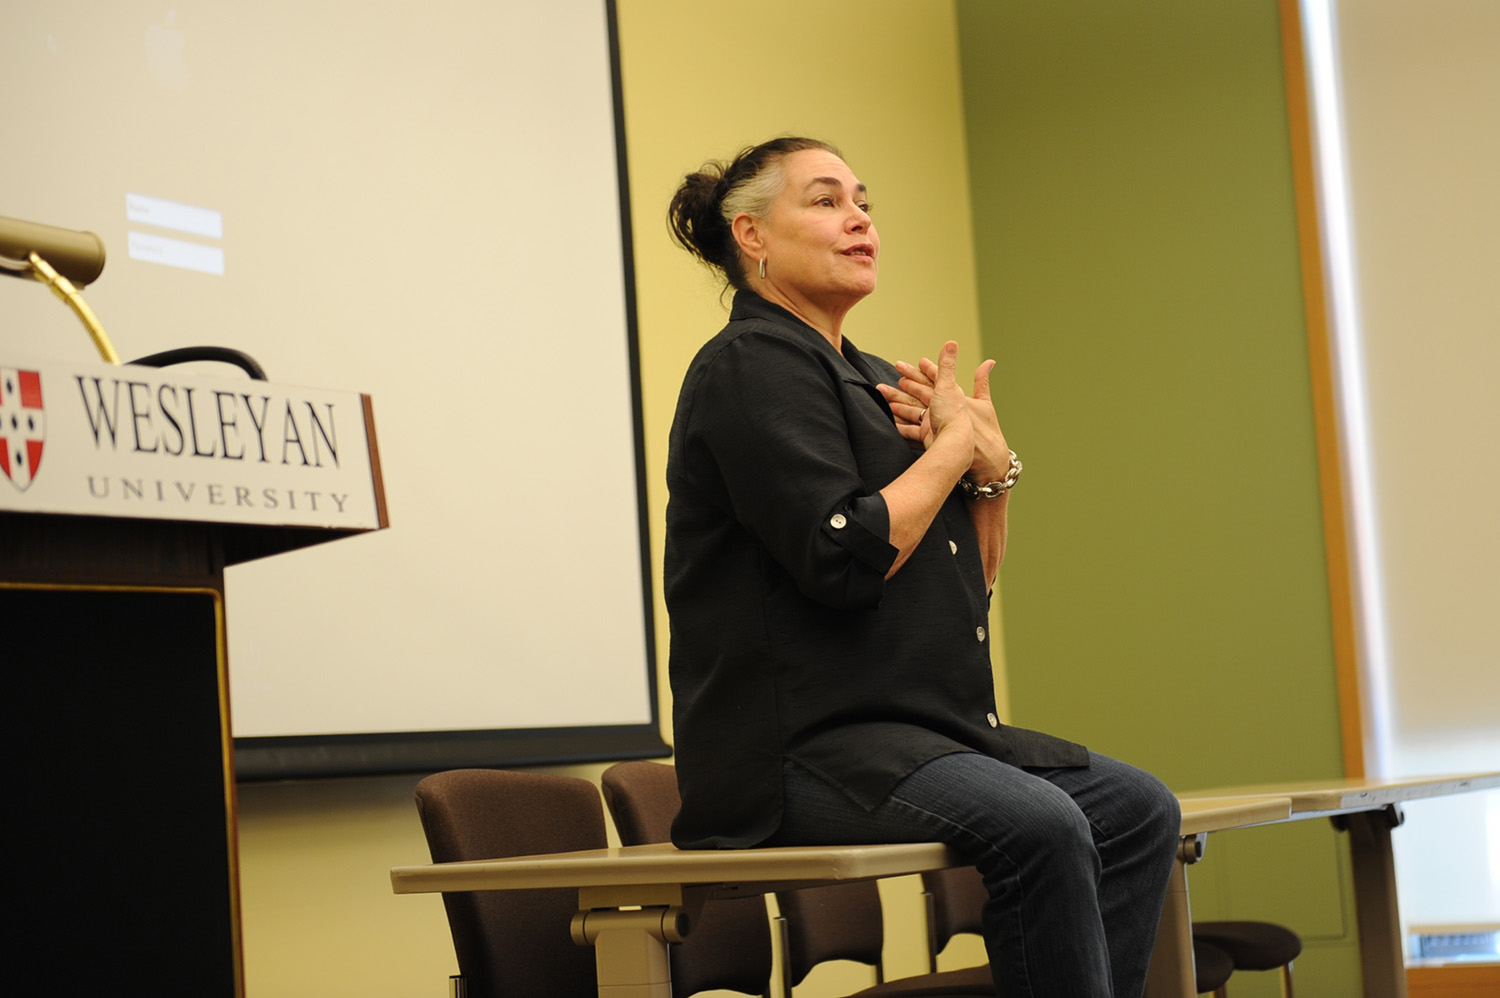 Award-winning novelist Amy Bloom ’75, director of the Shapiro Center for Creative Writing and Distinguished University Writer-in-Residence, spoke to conference participants about her writing process and read from her latest book,  Lucky Us.